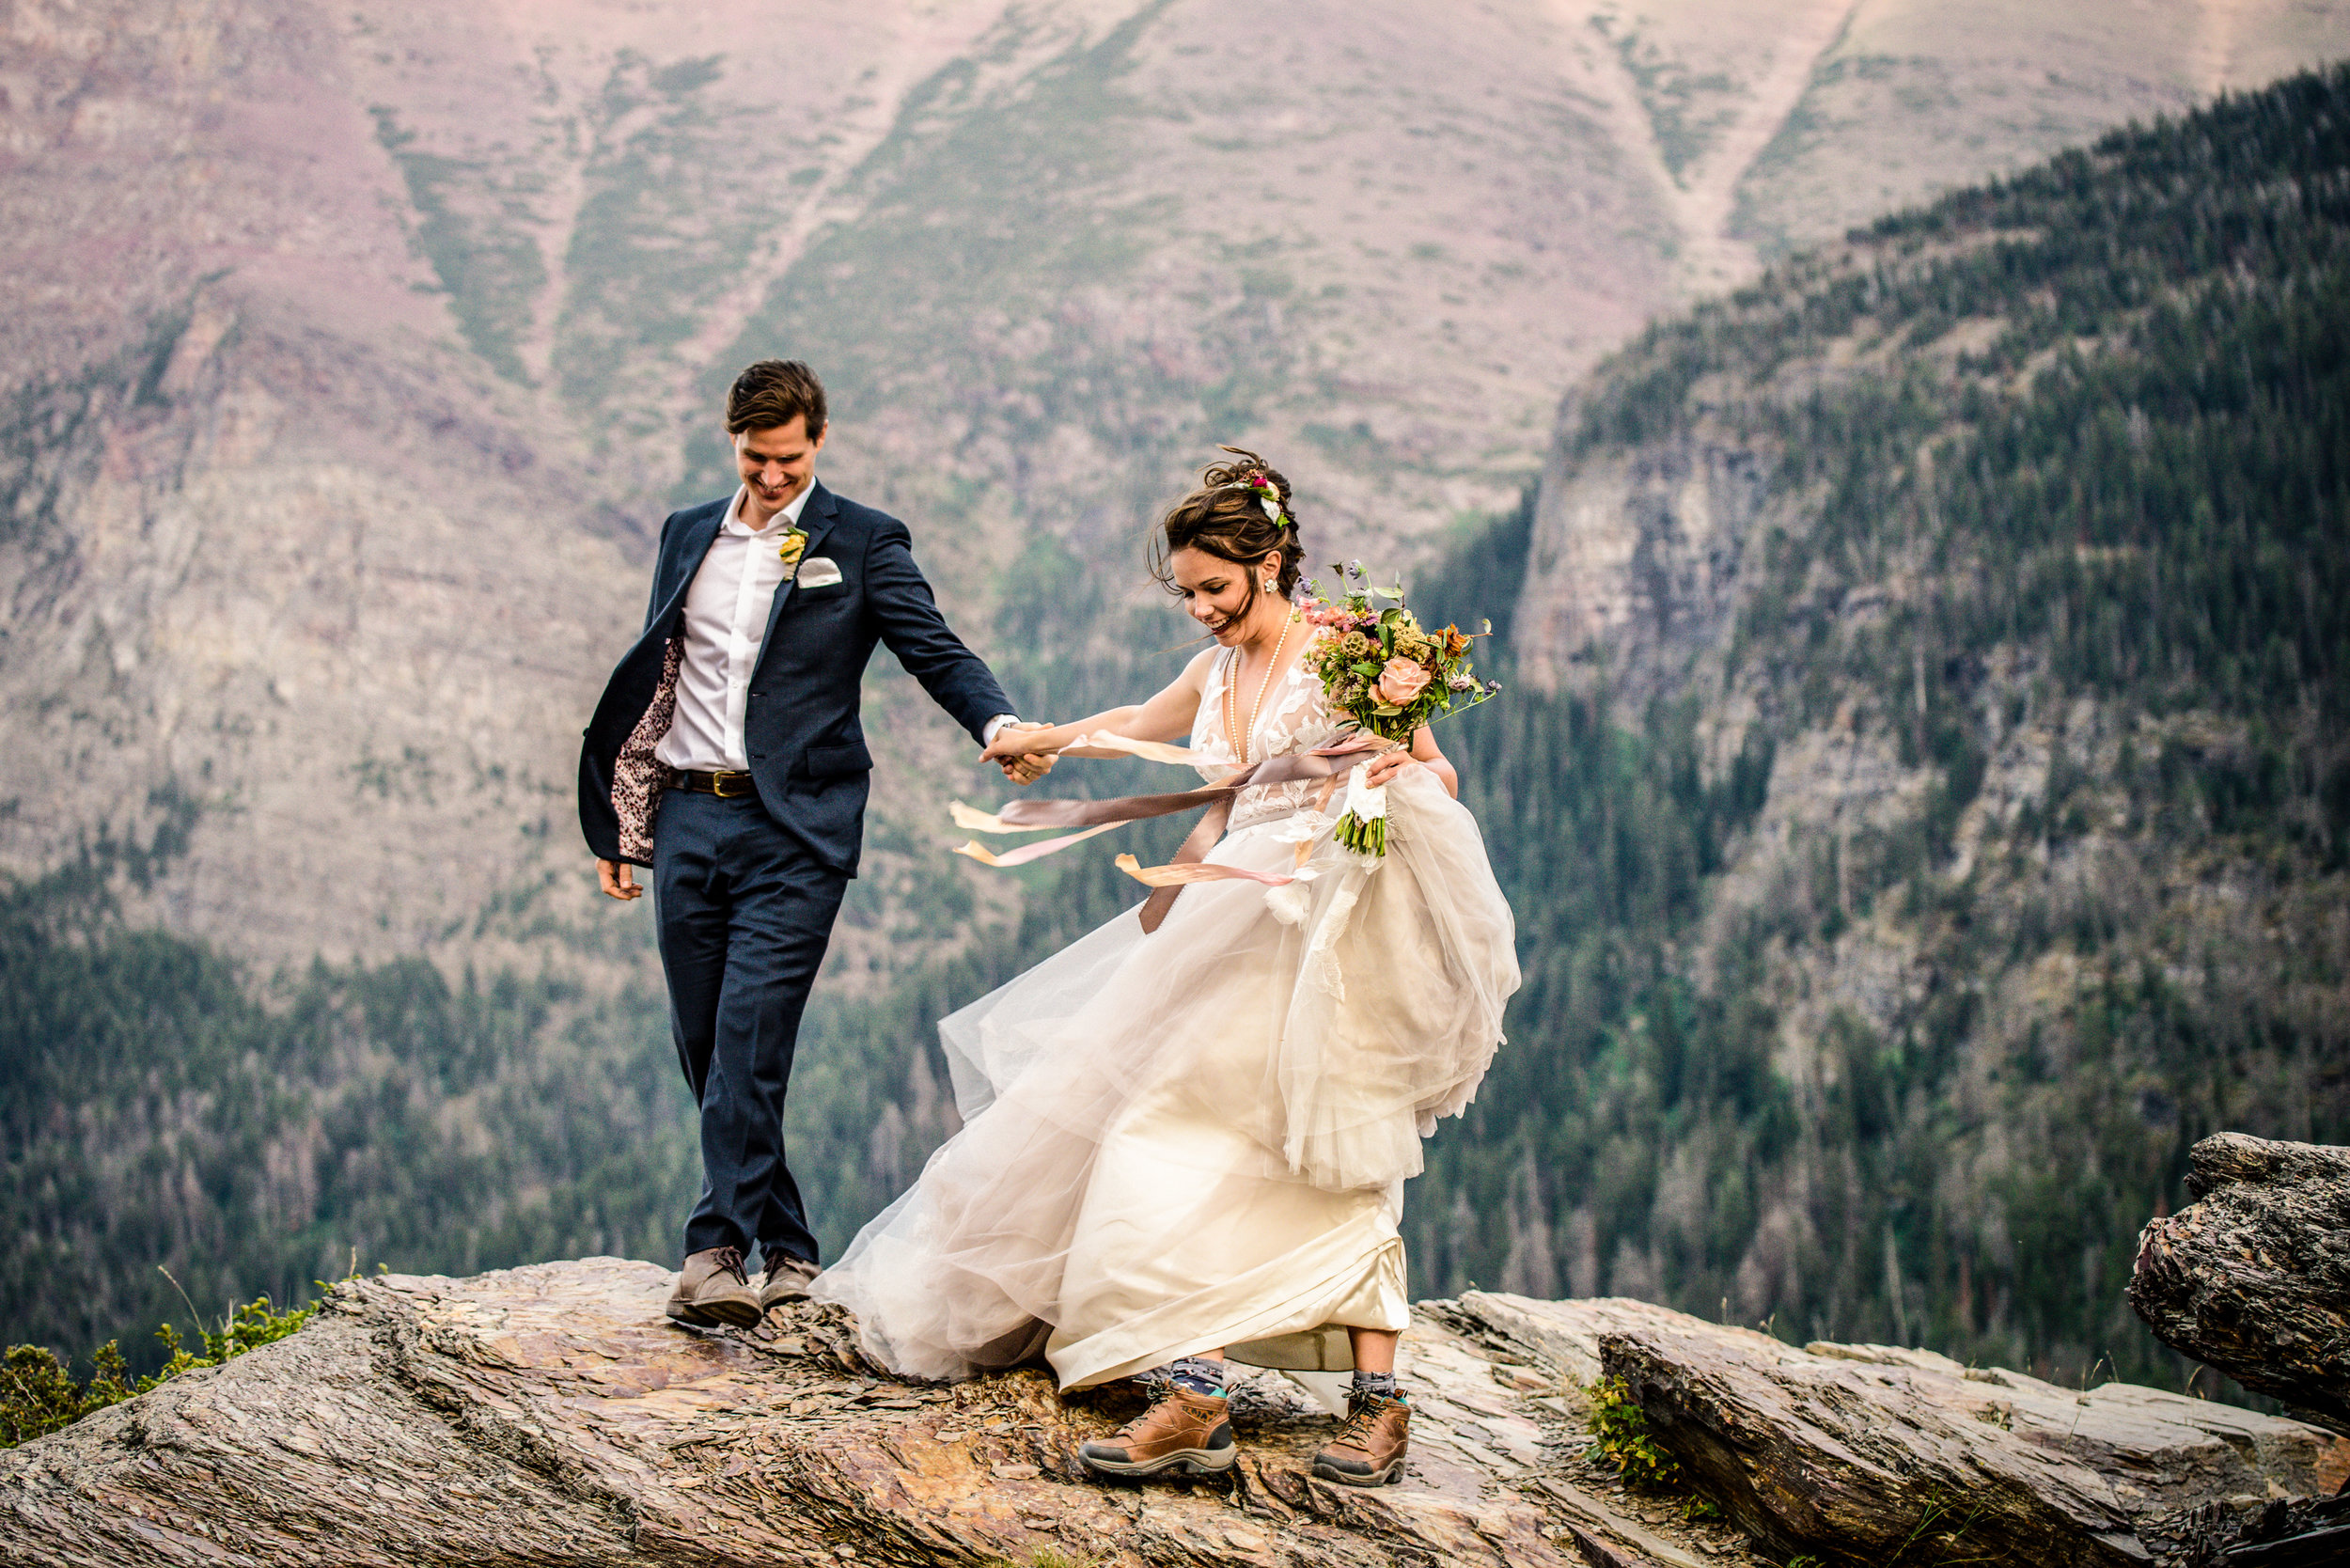 How To Elope In Glacier National Park Montana Elopement Wedding Planning Guide Glacier Park Montana Elopement And Wedding Photographer Adventure Packages Carrie Ann Photography